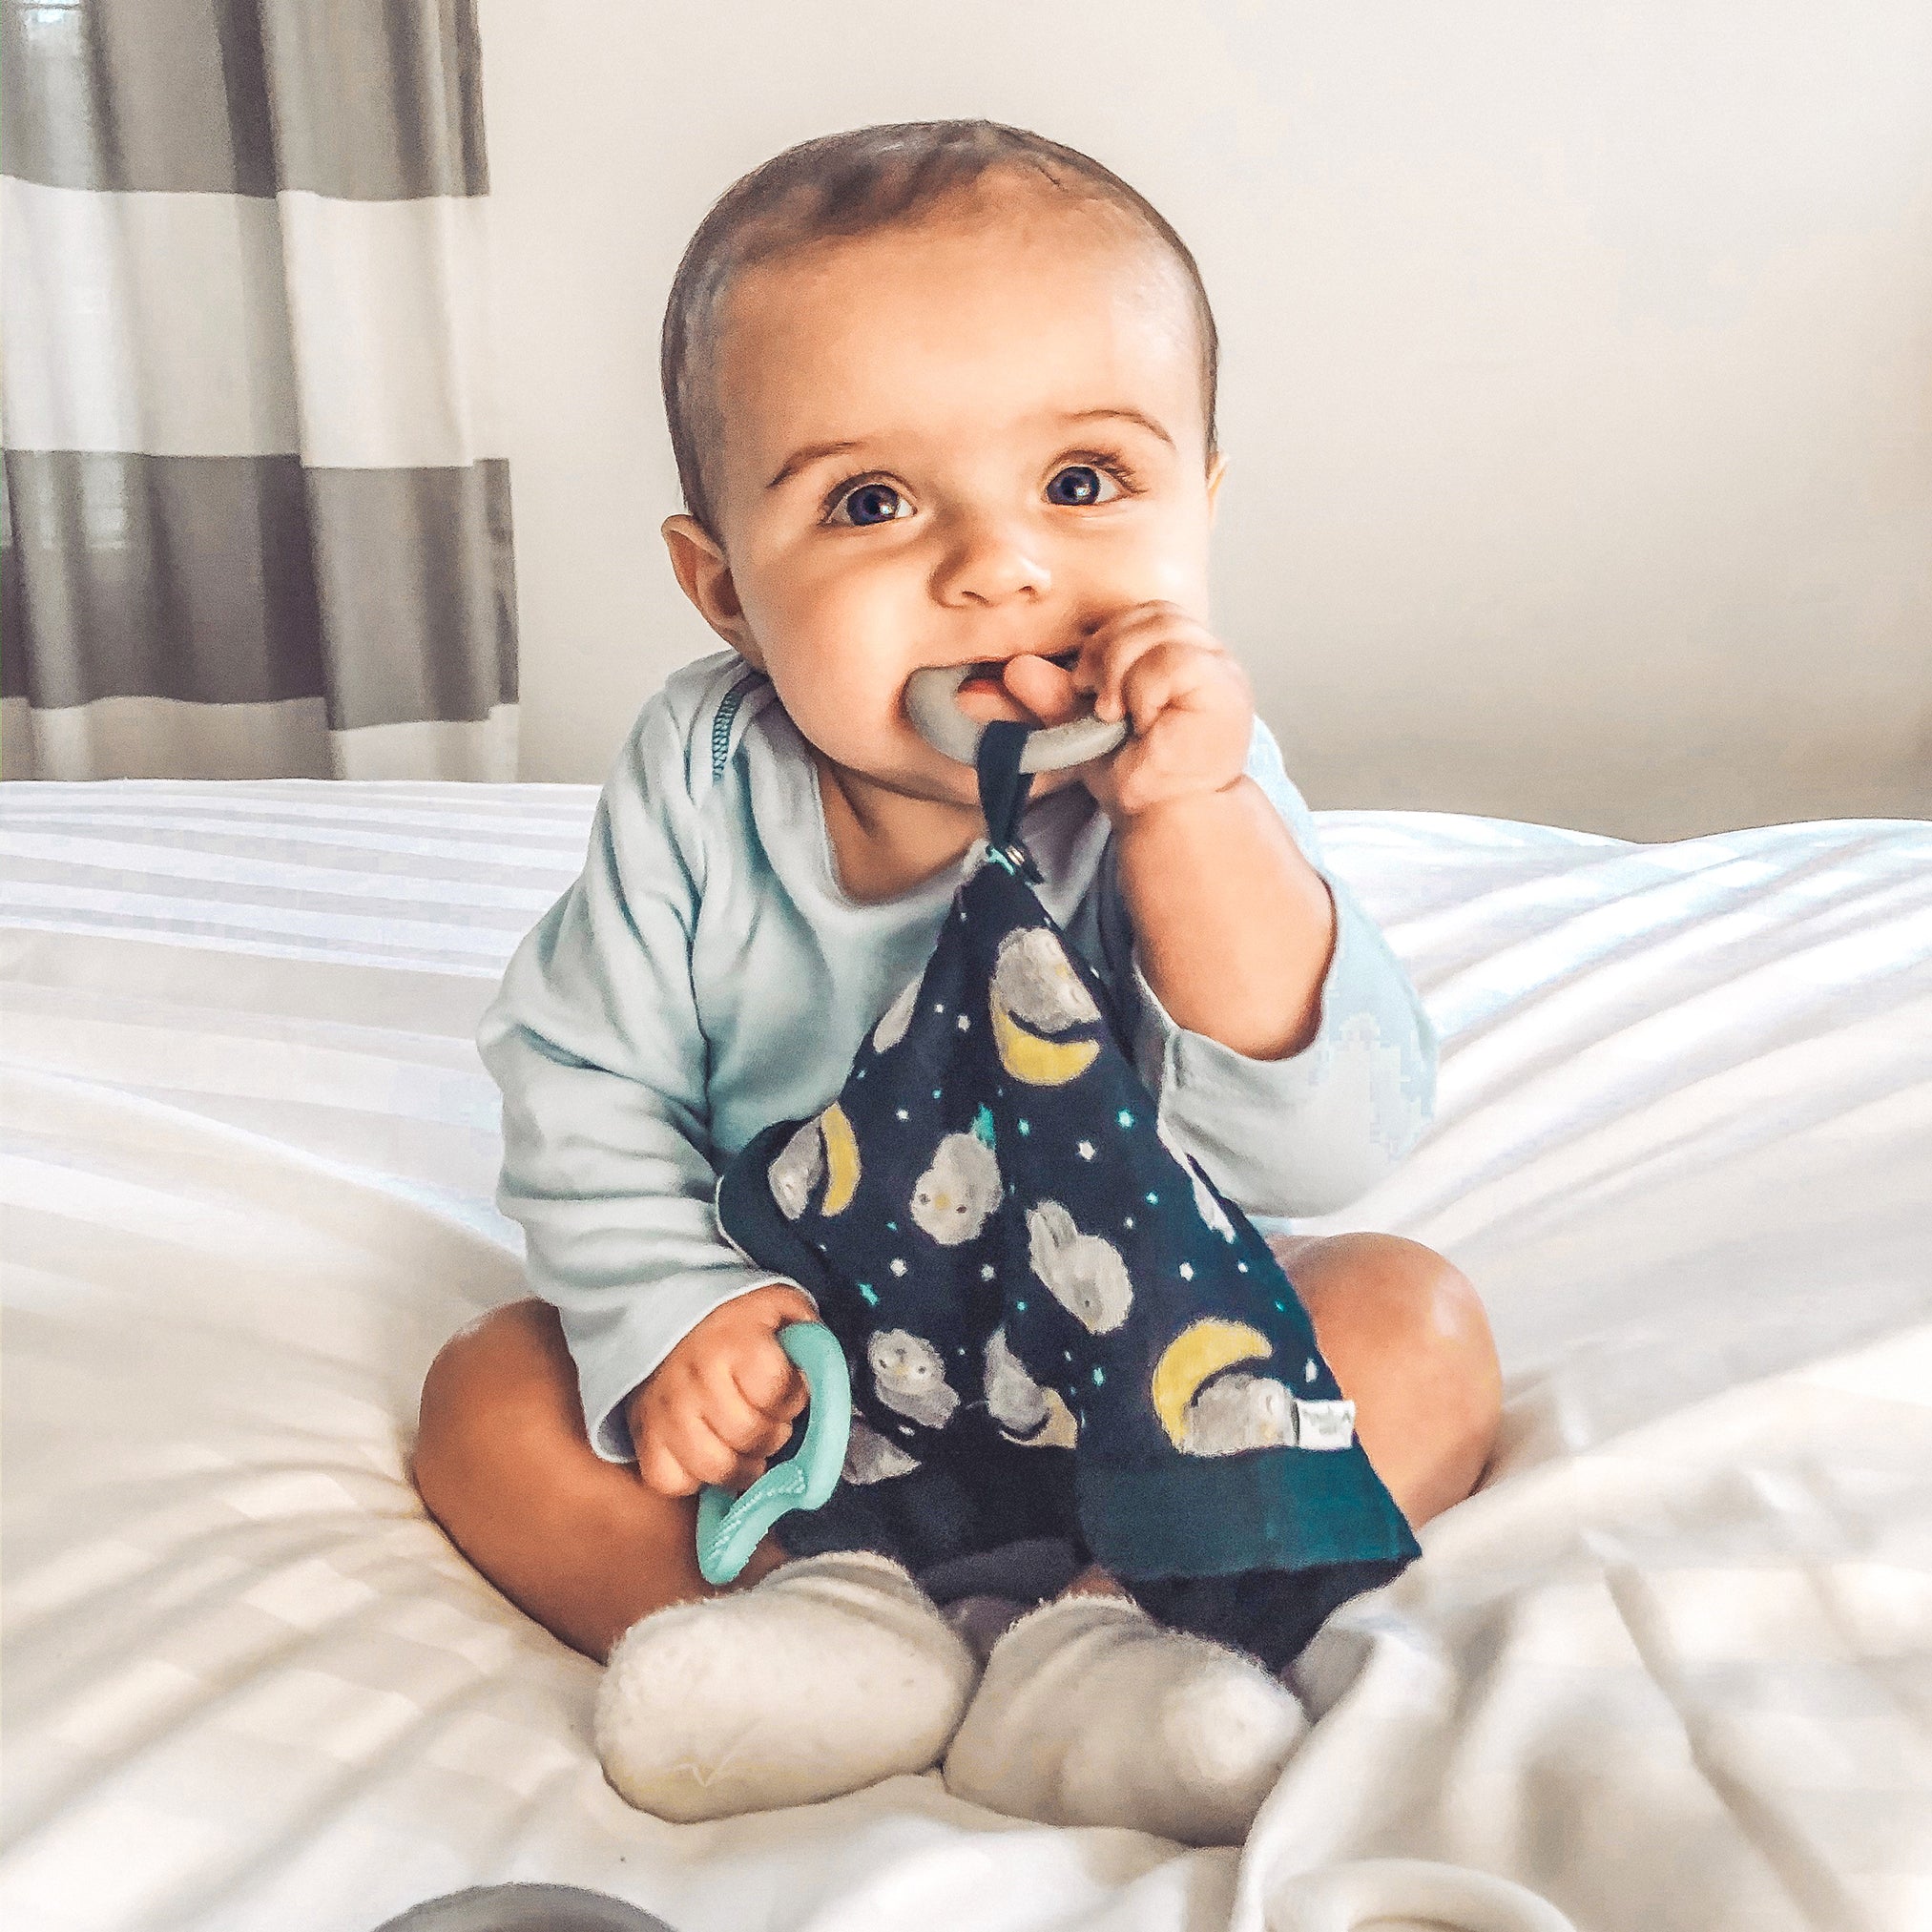 An adorable infant boy with long eyelashes looking up is hold an aqua teether in one hand a gray first teether made from silicone in his other hand up to his mouth.